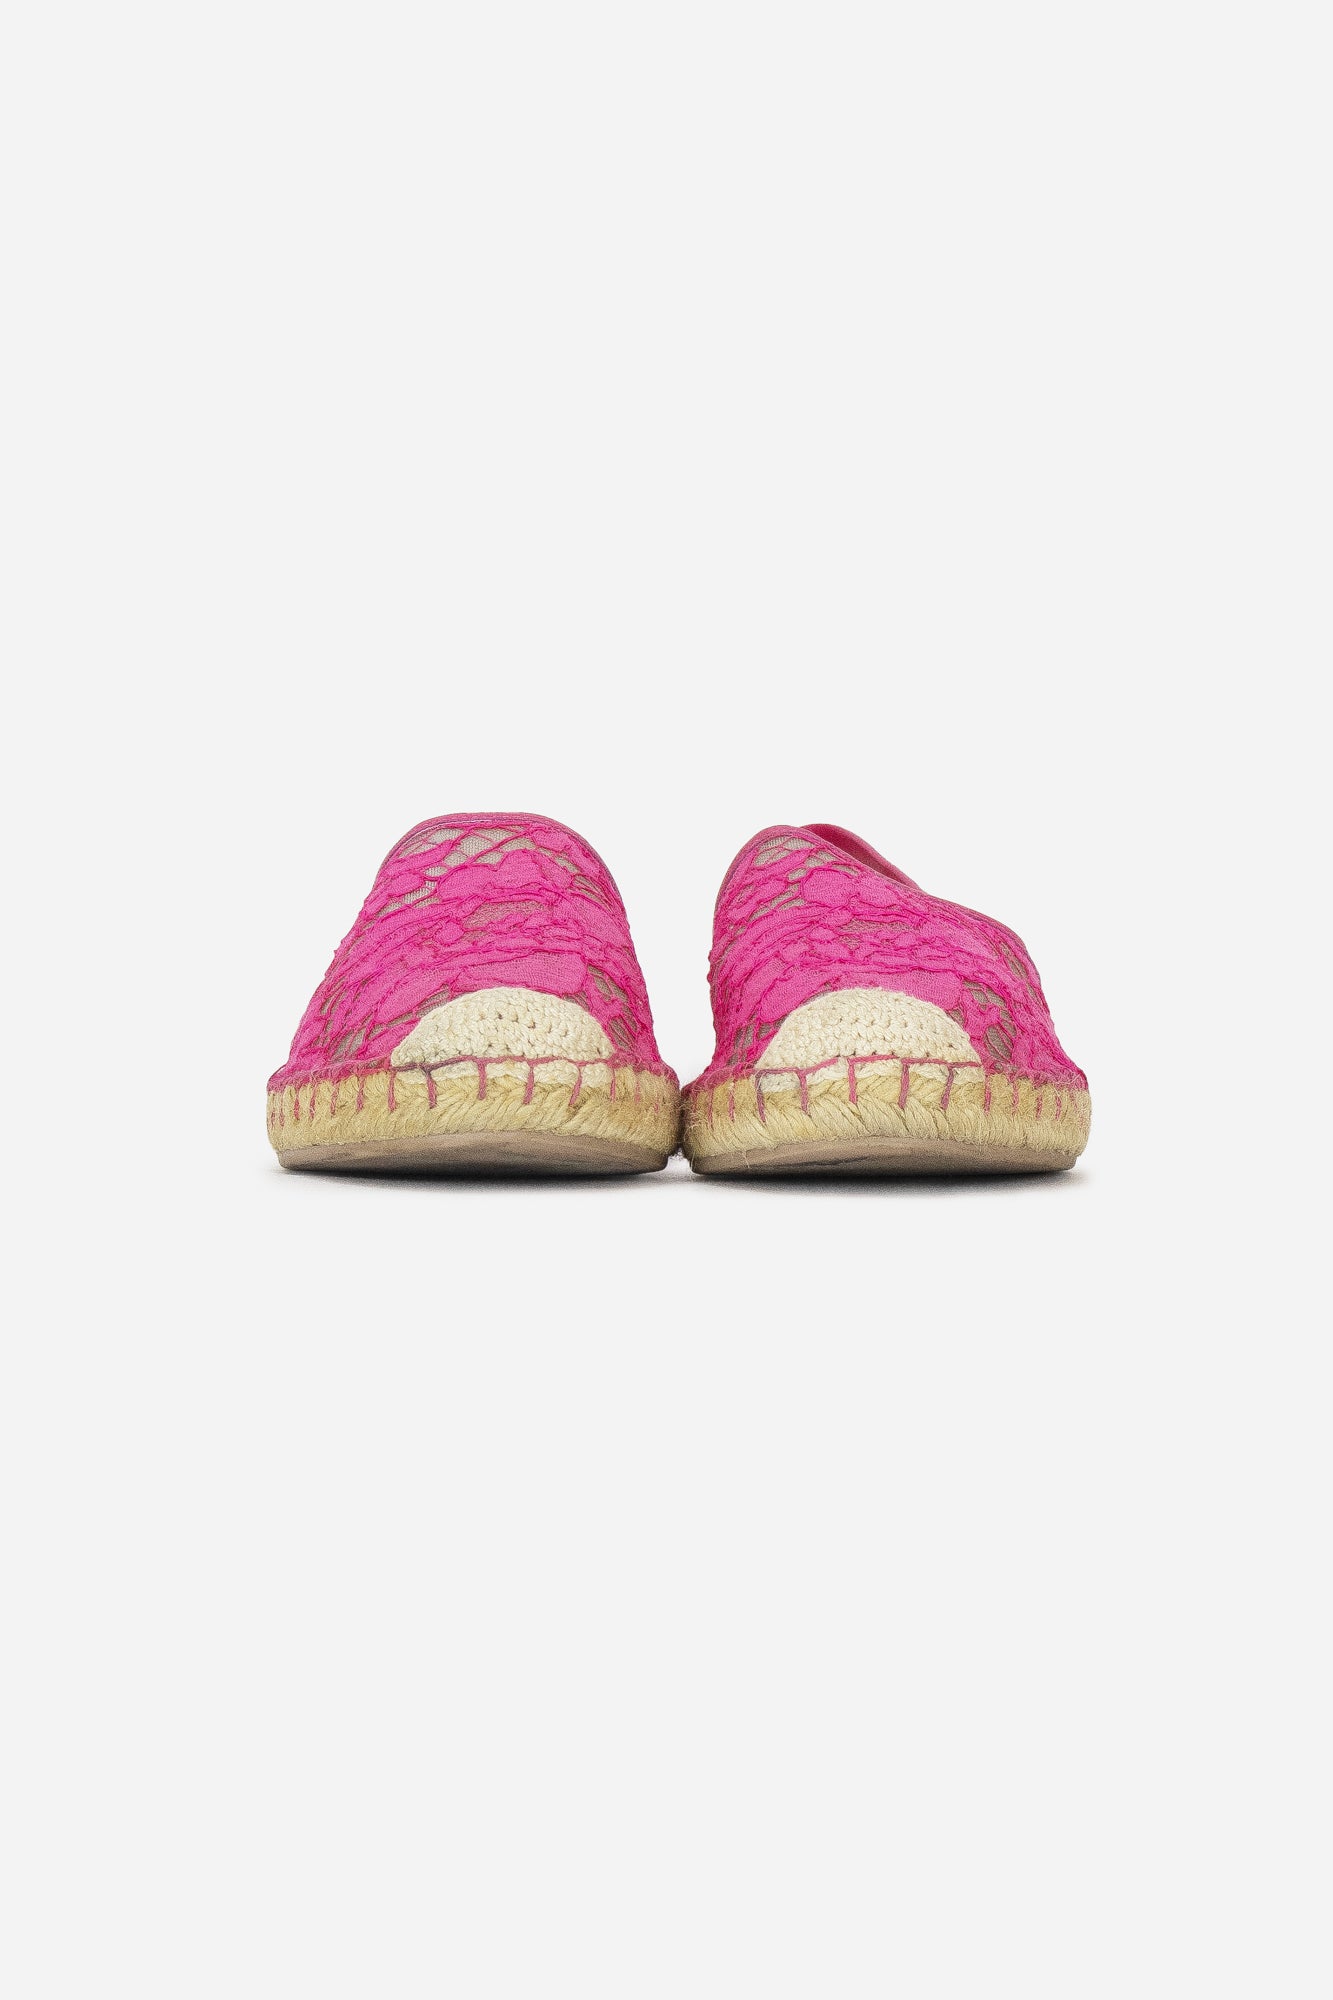 Pink Lace and Leather Espadrilles Flats